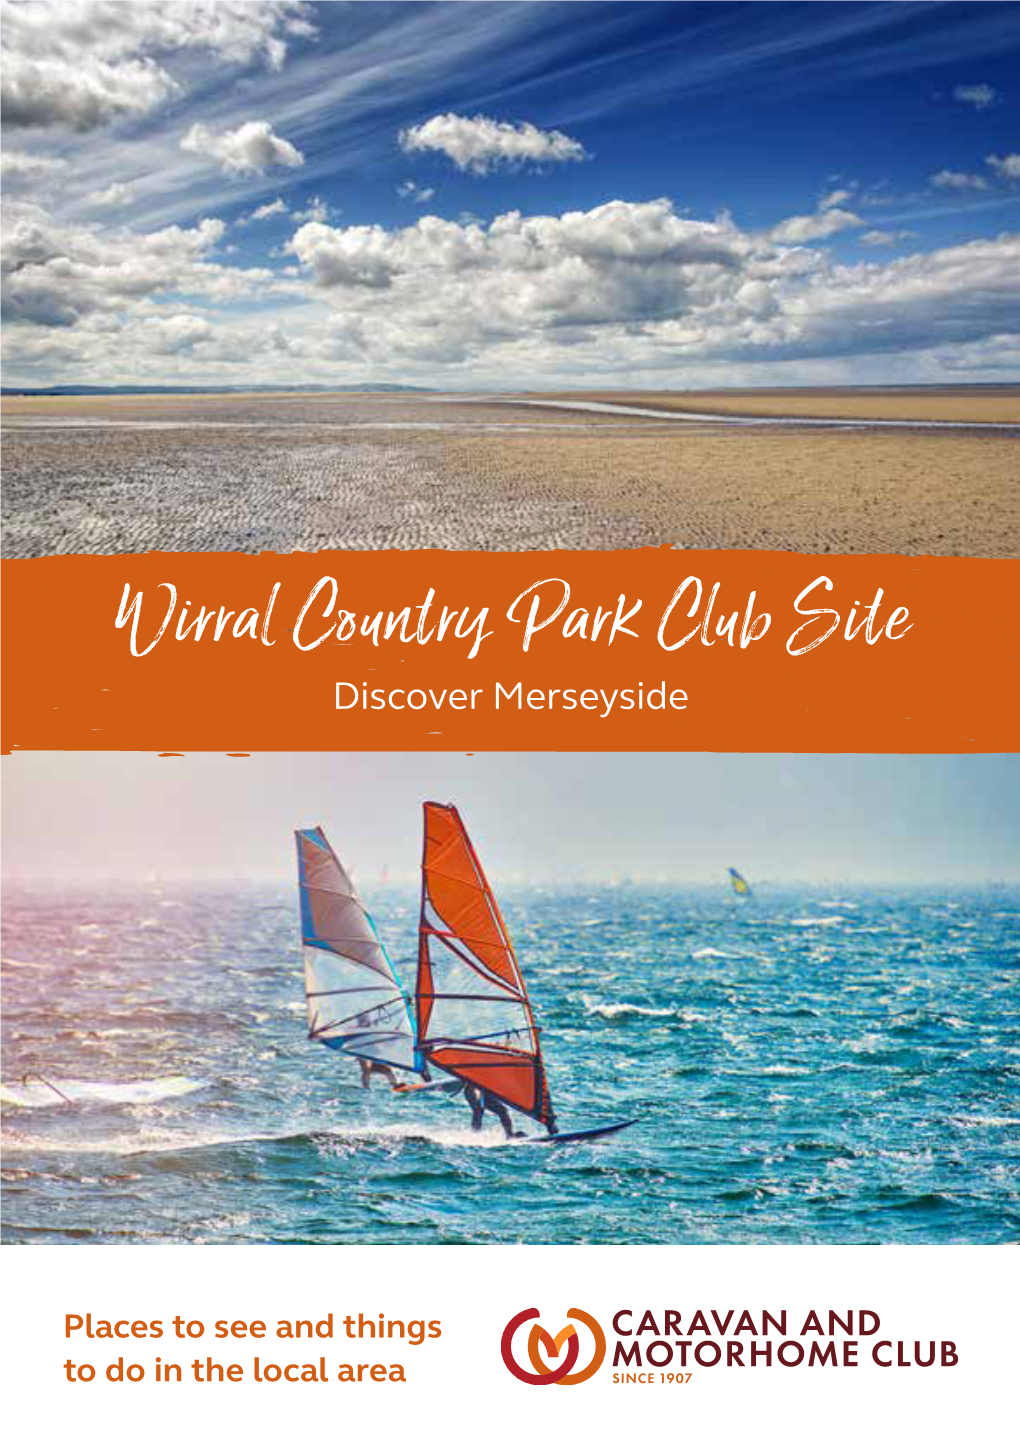 Wirral Country Park Club Site Discover Merseyside